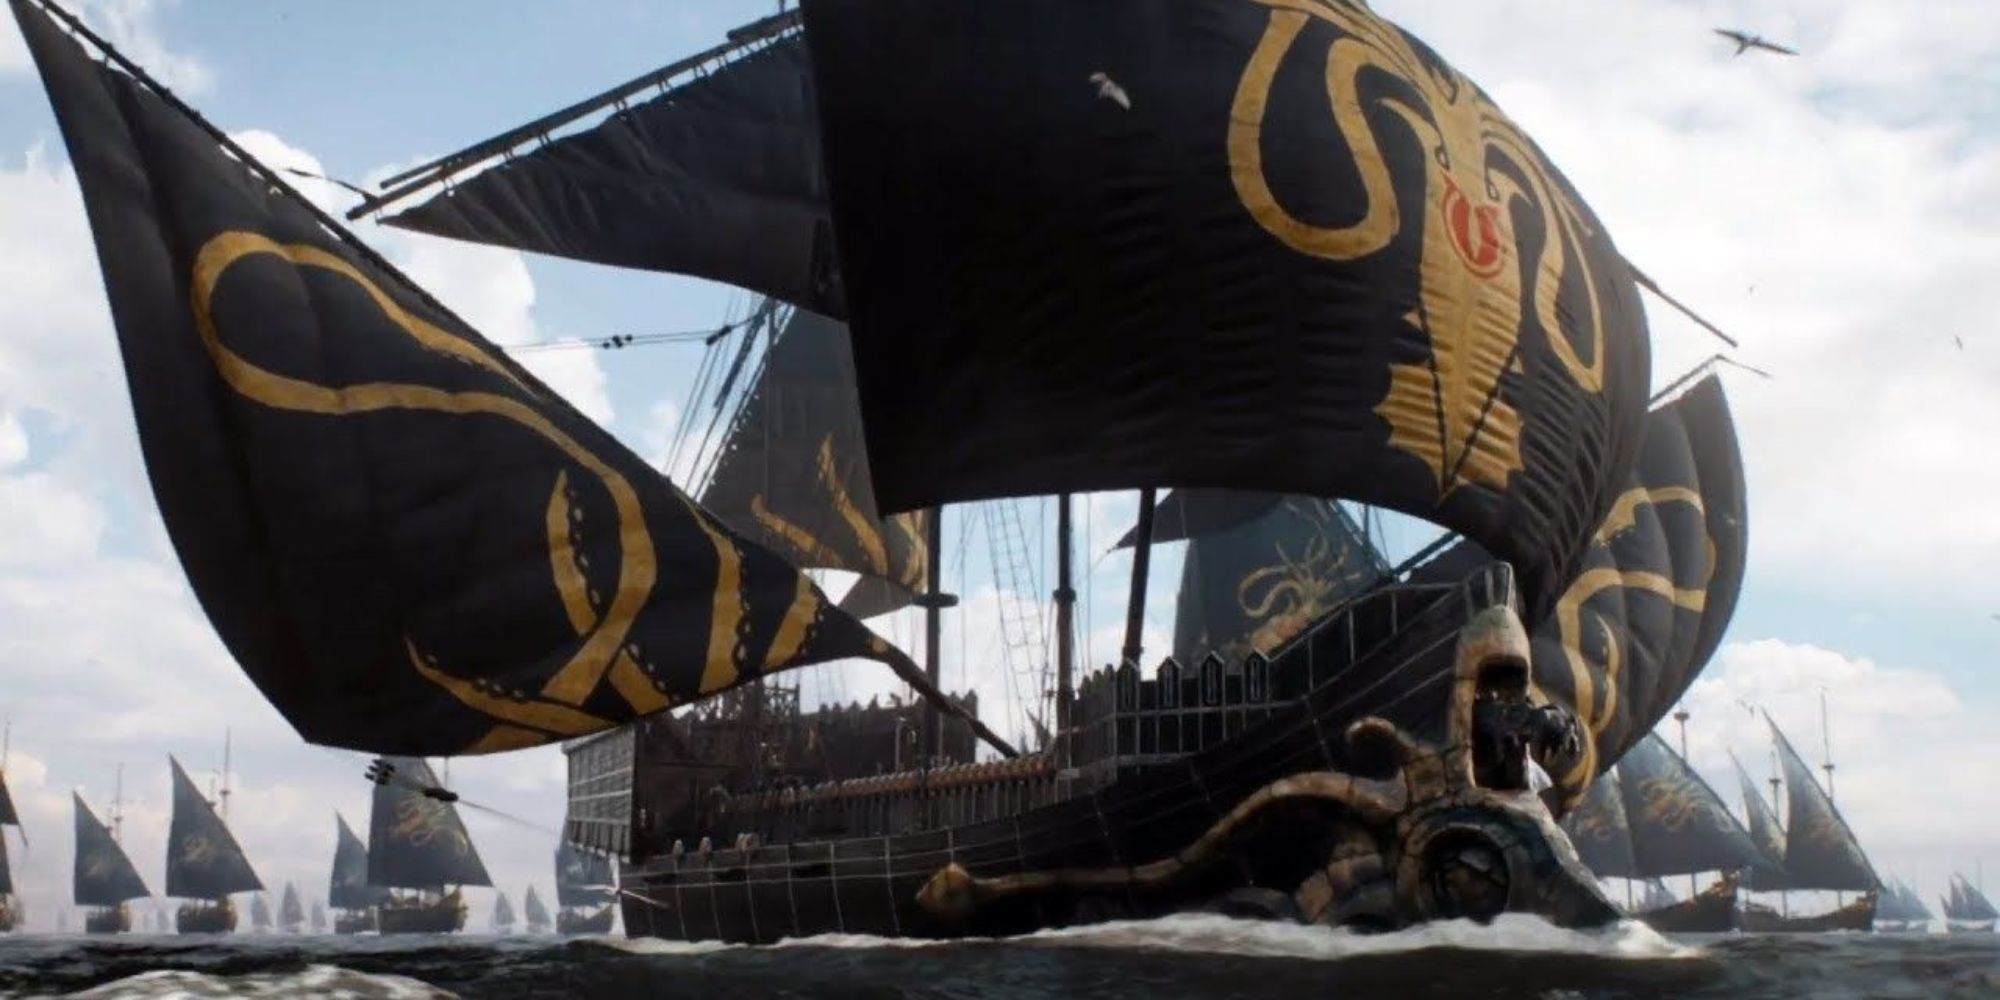 The Greyjoy fleet on the move in 'Game of Thrones'